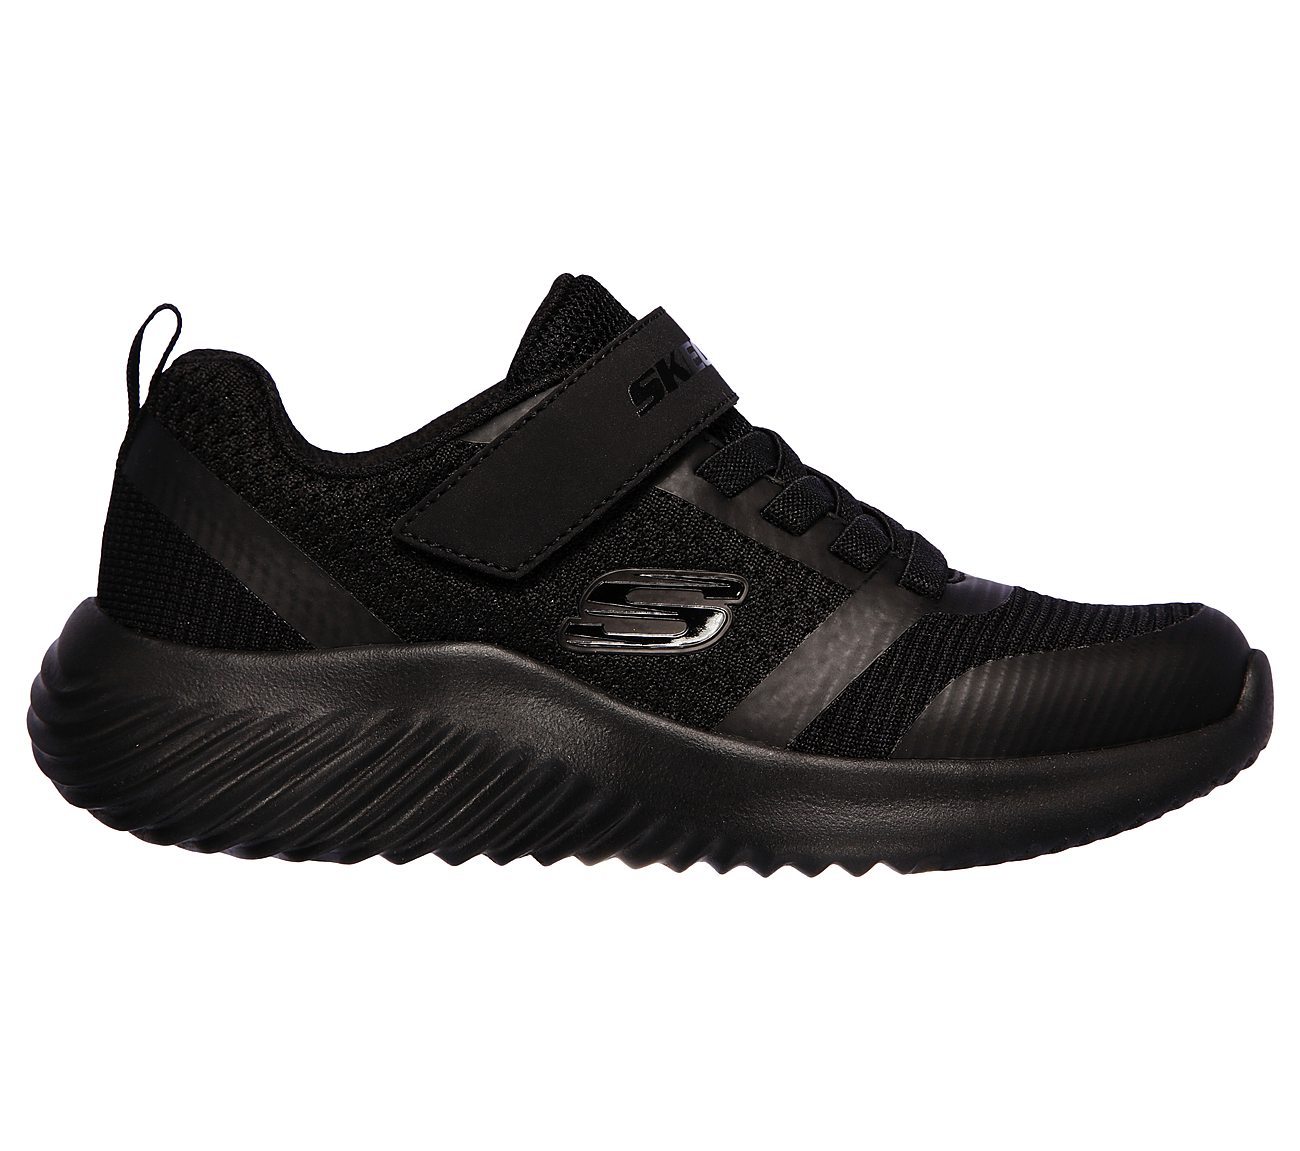 BOUNDER - ZALLOW, BBLACK Footwear Right View